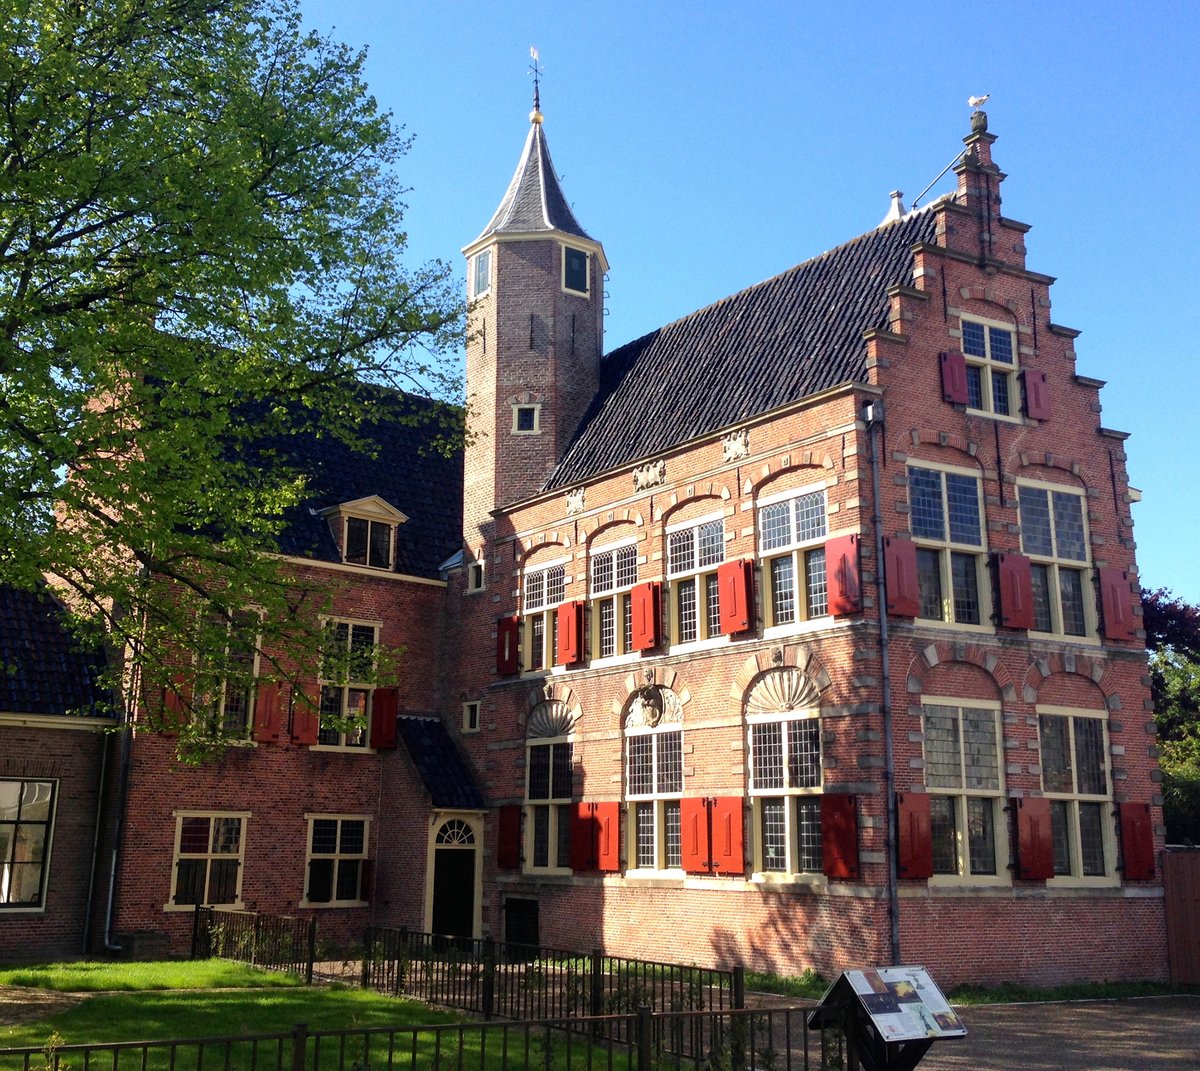 The 'Nieuwe of Sint Sebastiaansdoelen' is a monumental building in #Alkmaar (Noord-Holland). It was built in 1618 and served as a guildhall used by the civic guard company.